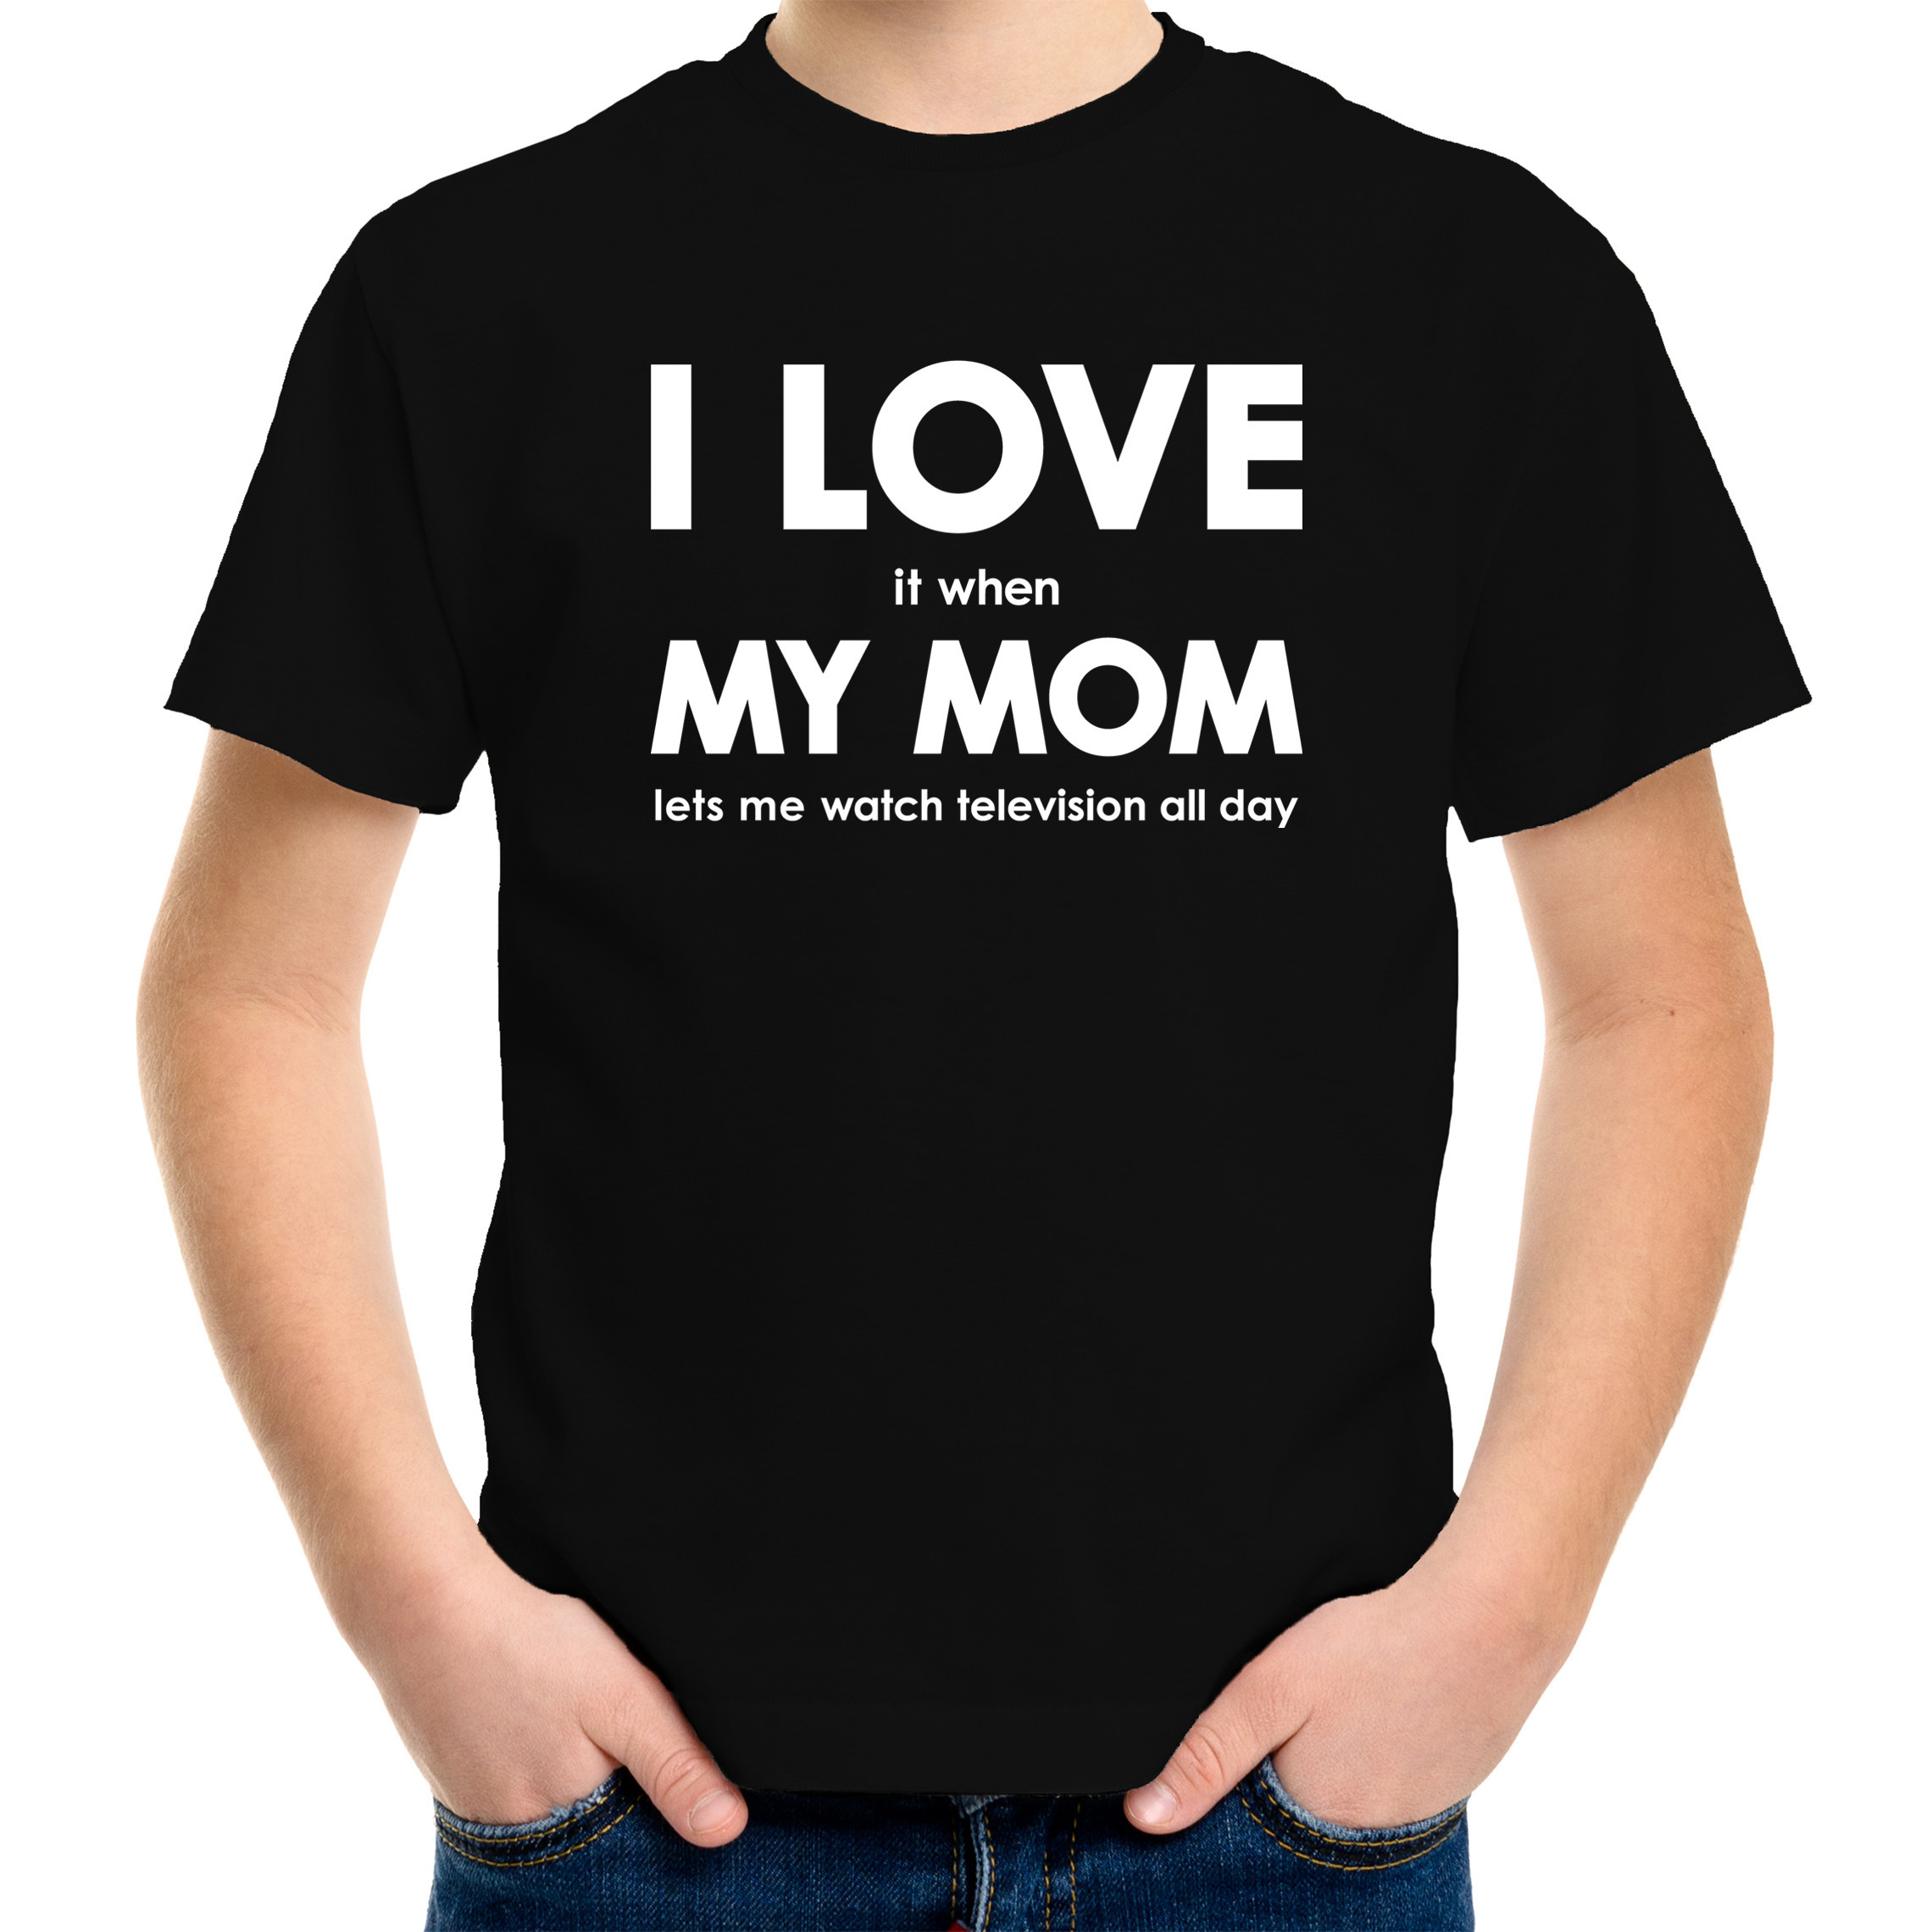 I love it when my mom lets me watch television all day t-shirt zwart voor kids